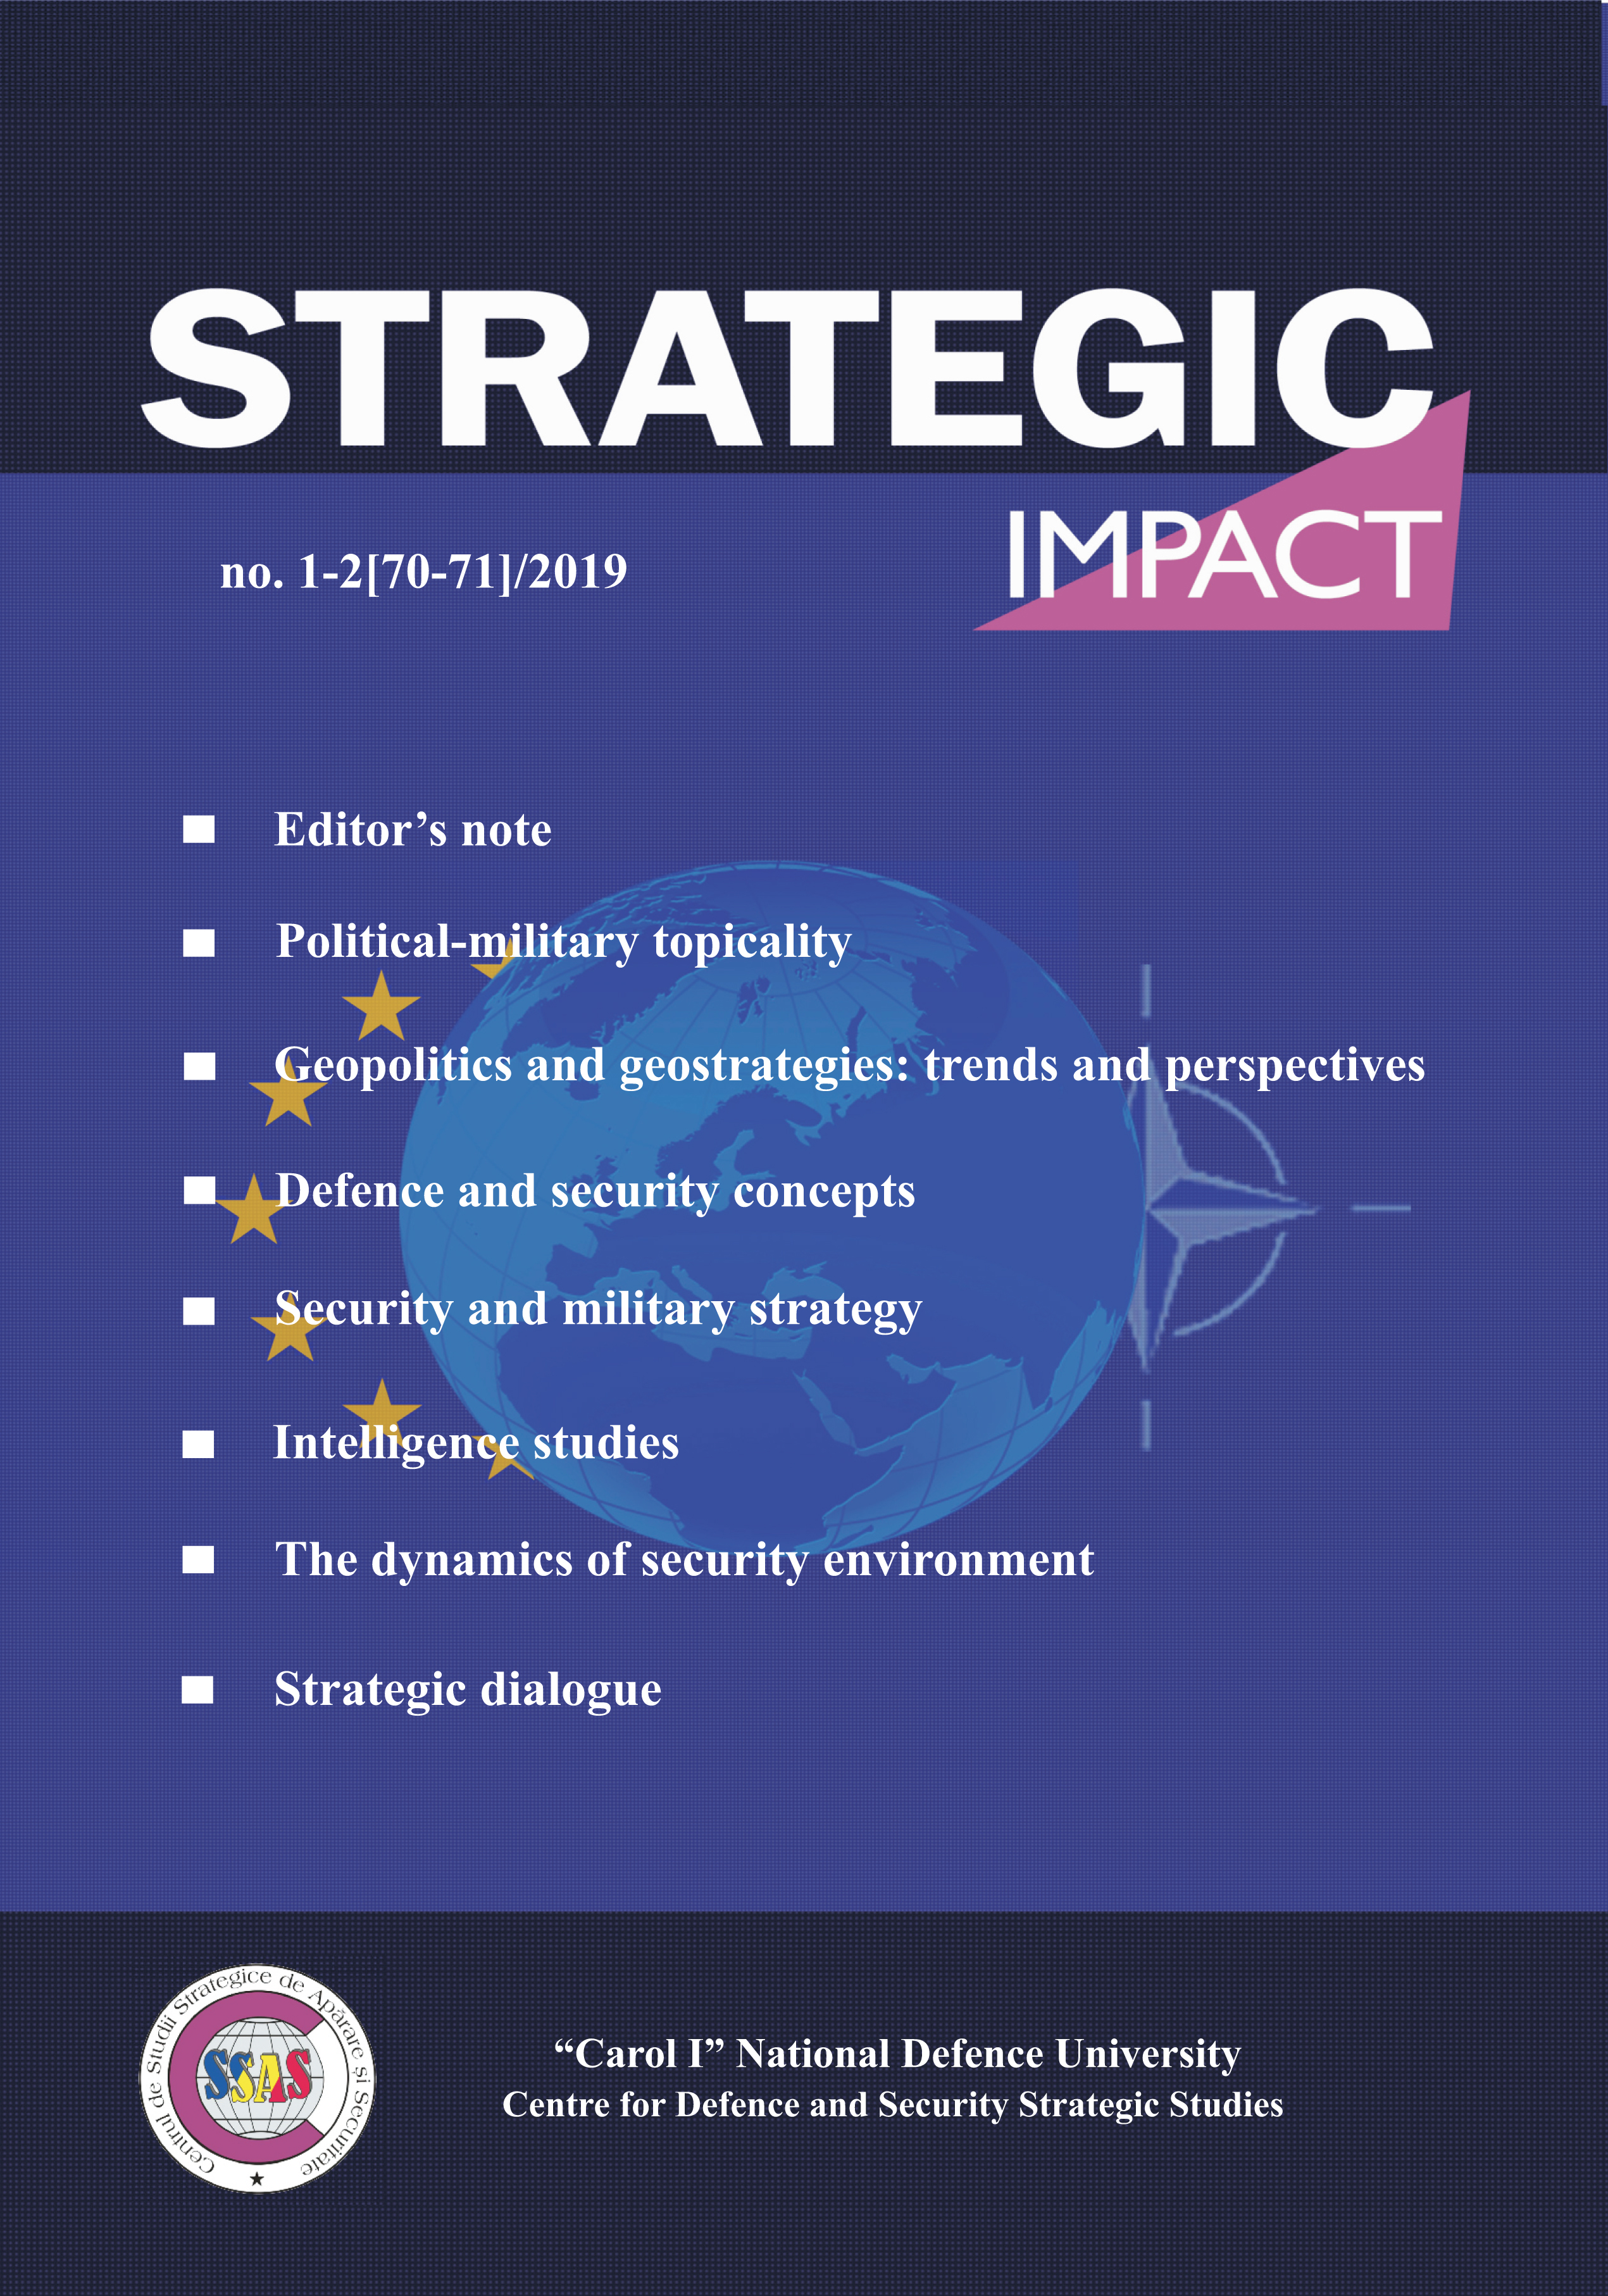 THE CONCEPTUAL DEVELOPMENT OF STRATEGIC COMMUNICATION IN THE SECURITY FIELD